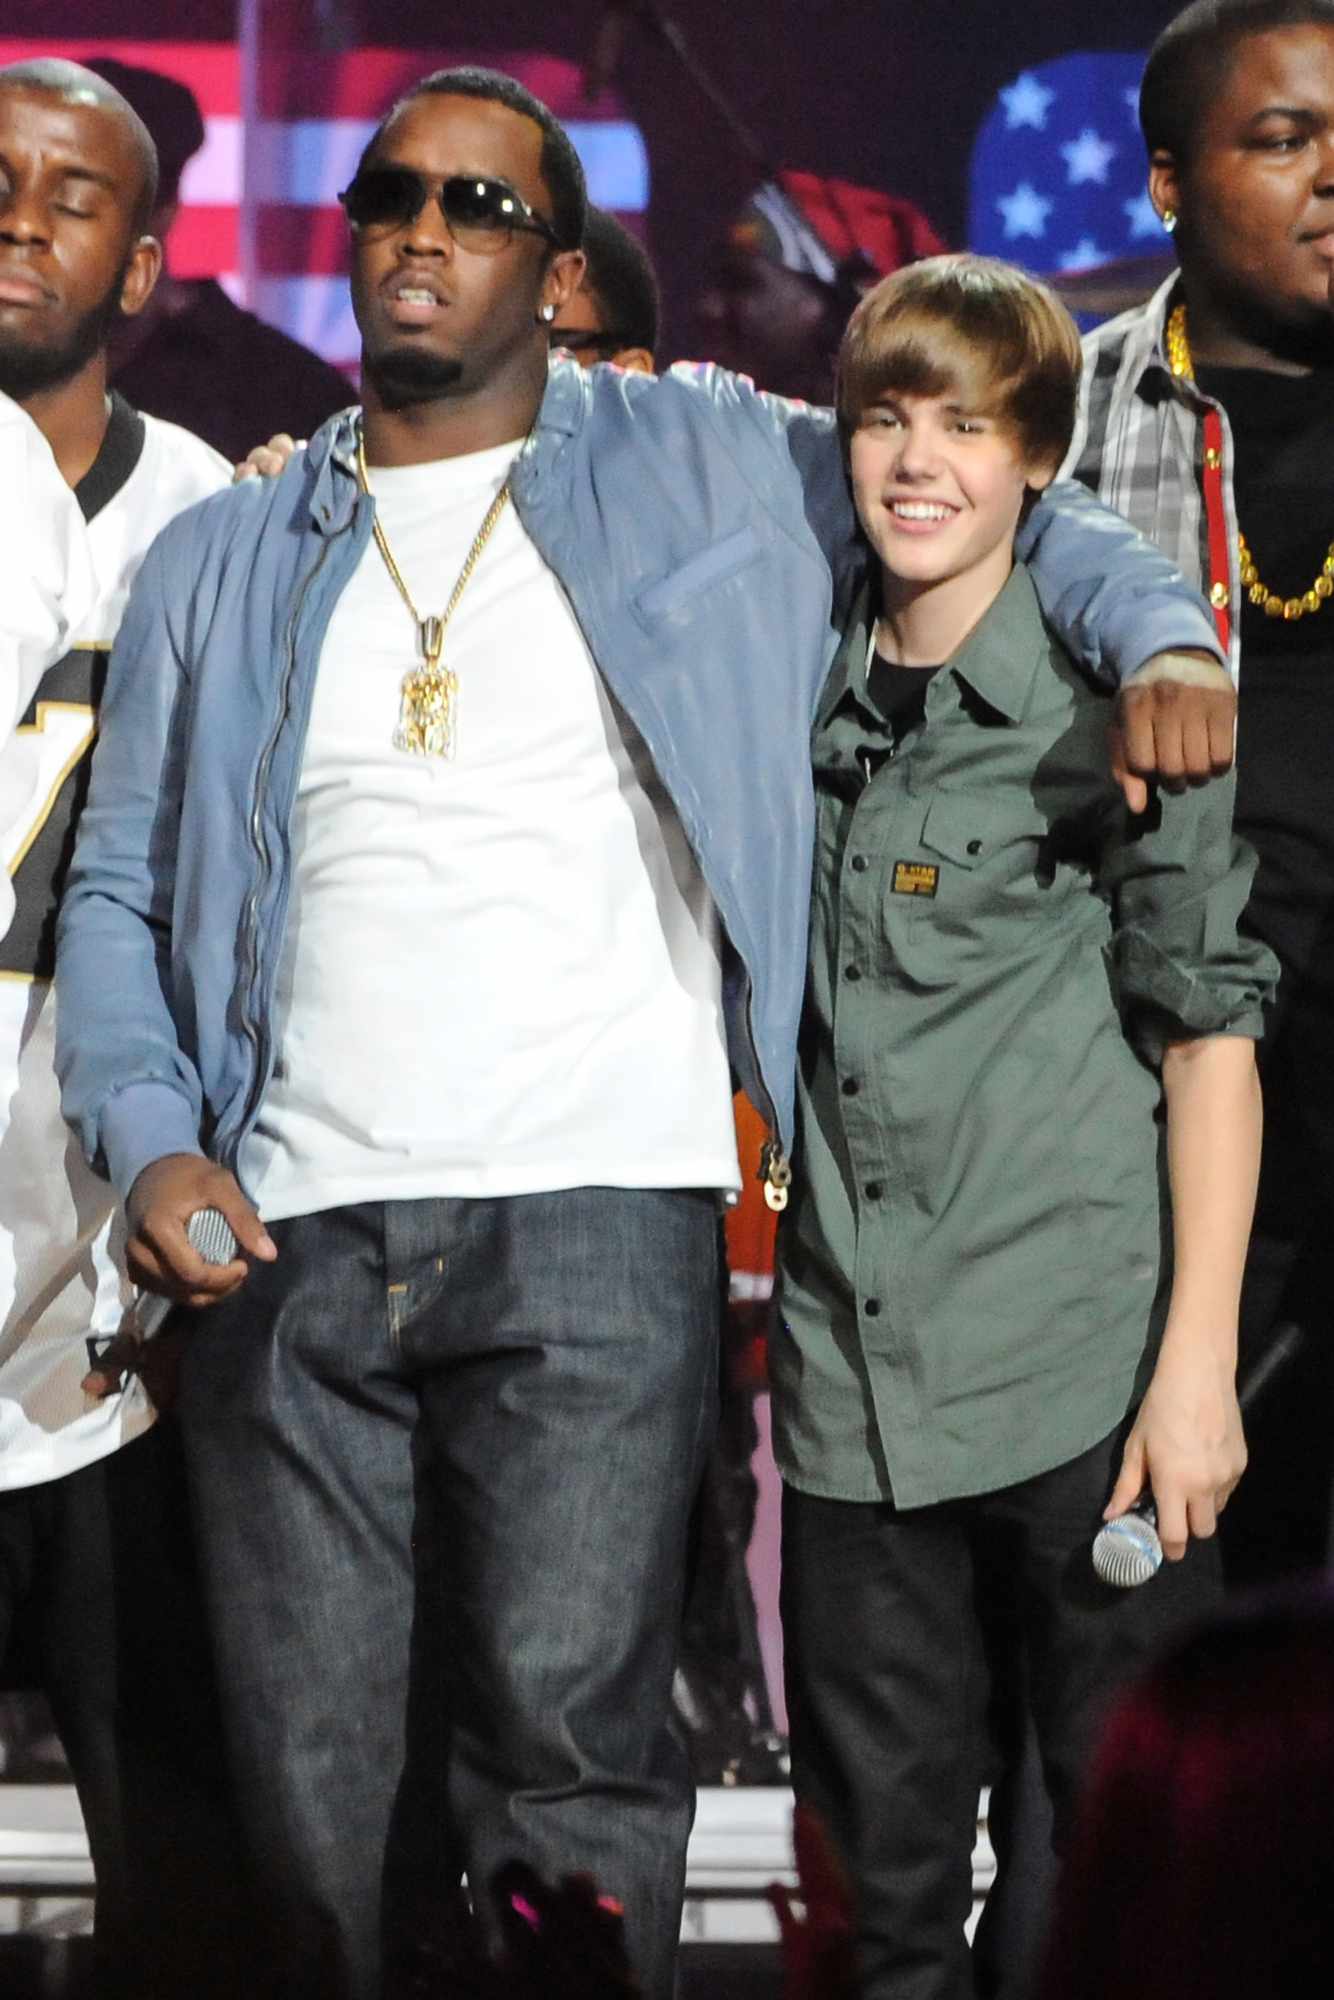 Sean "Diddy" Combs and Justin Bieber